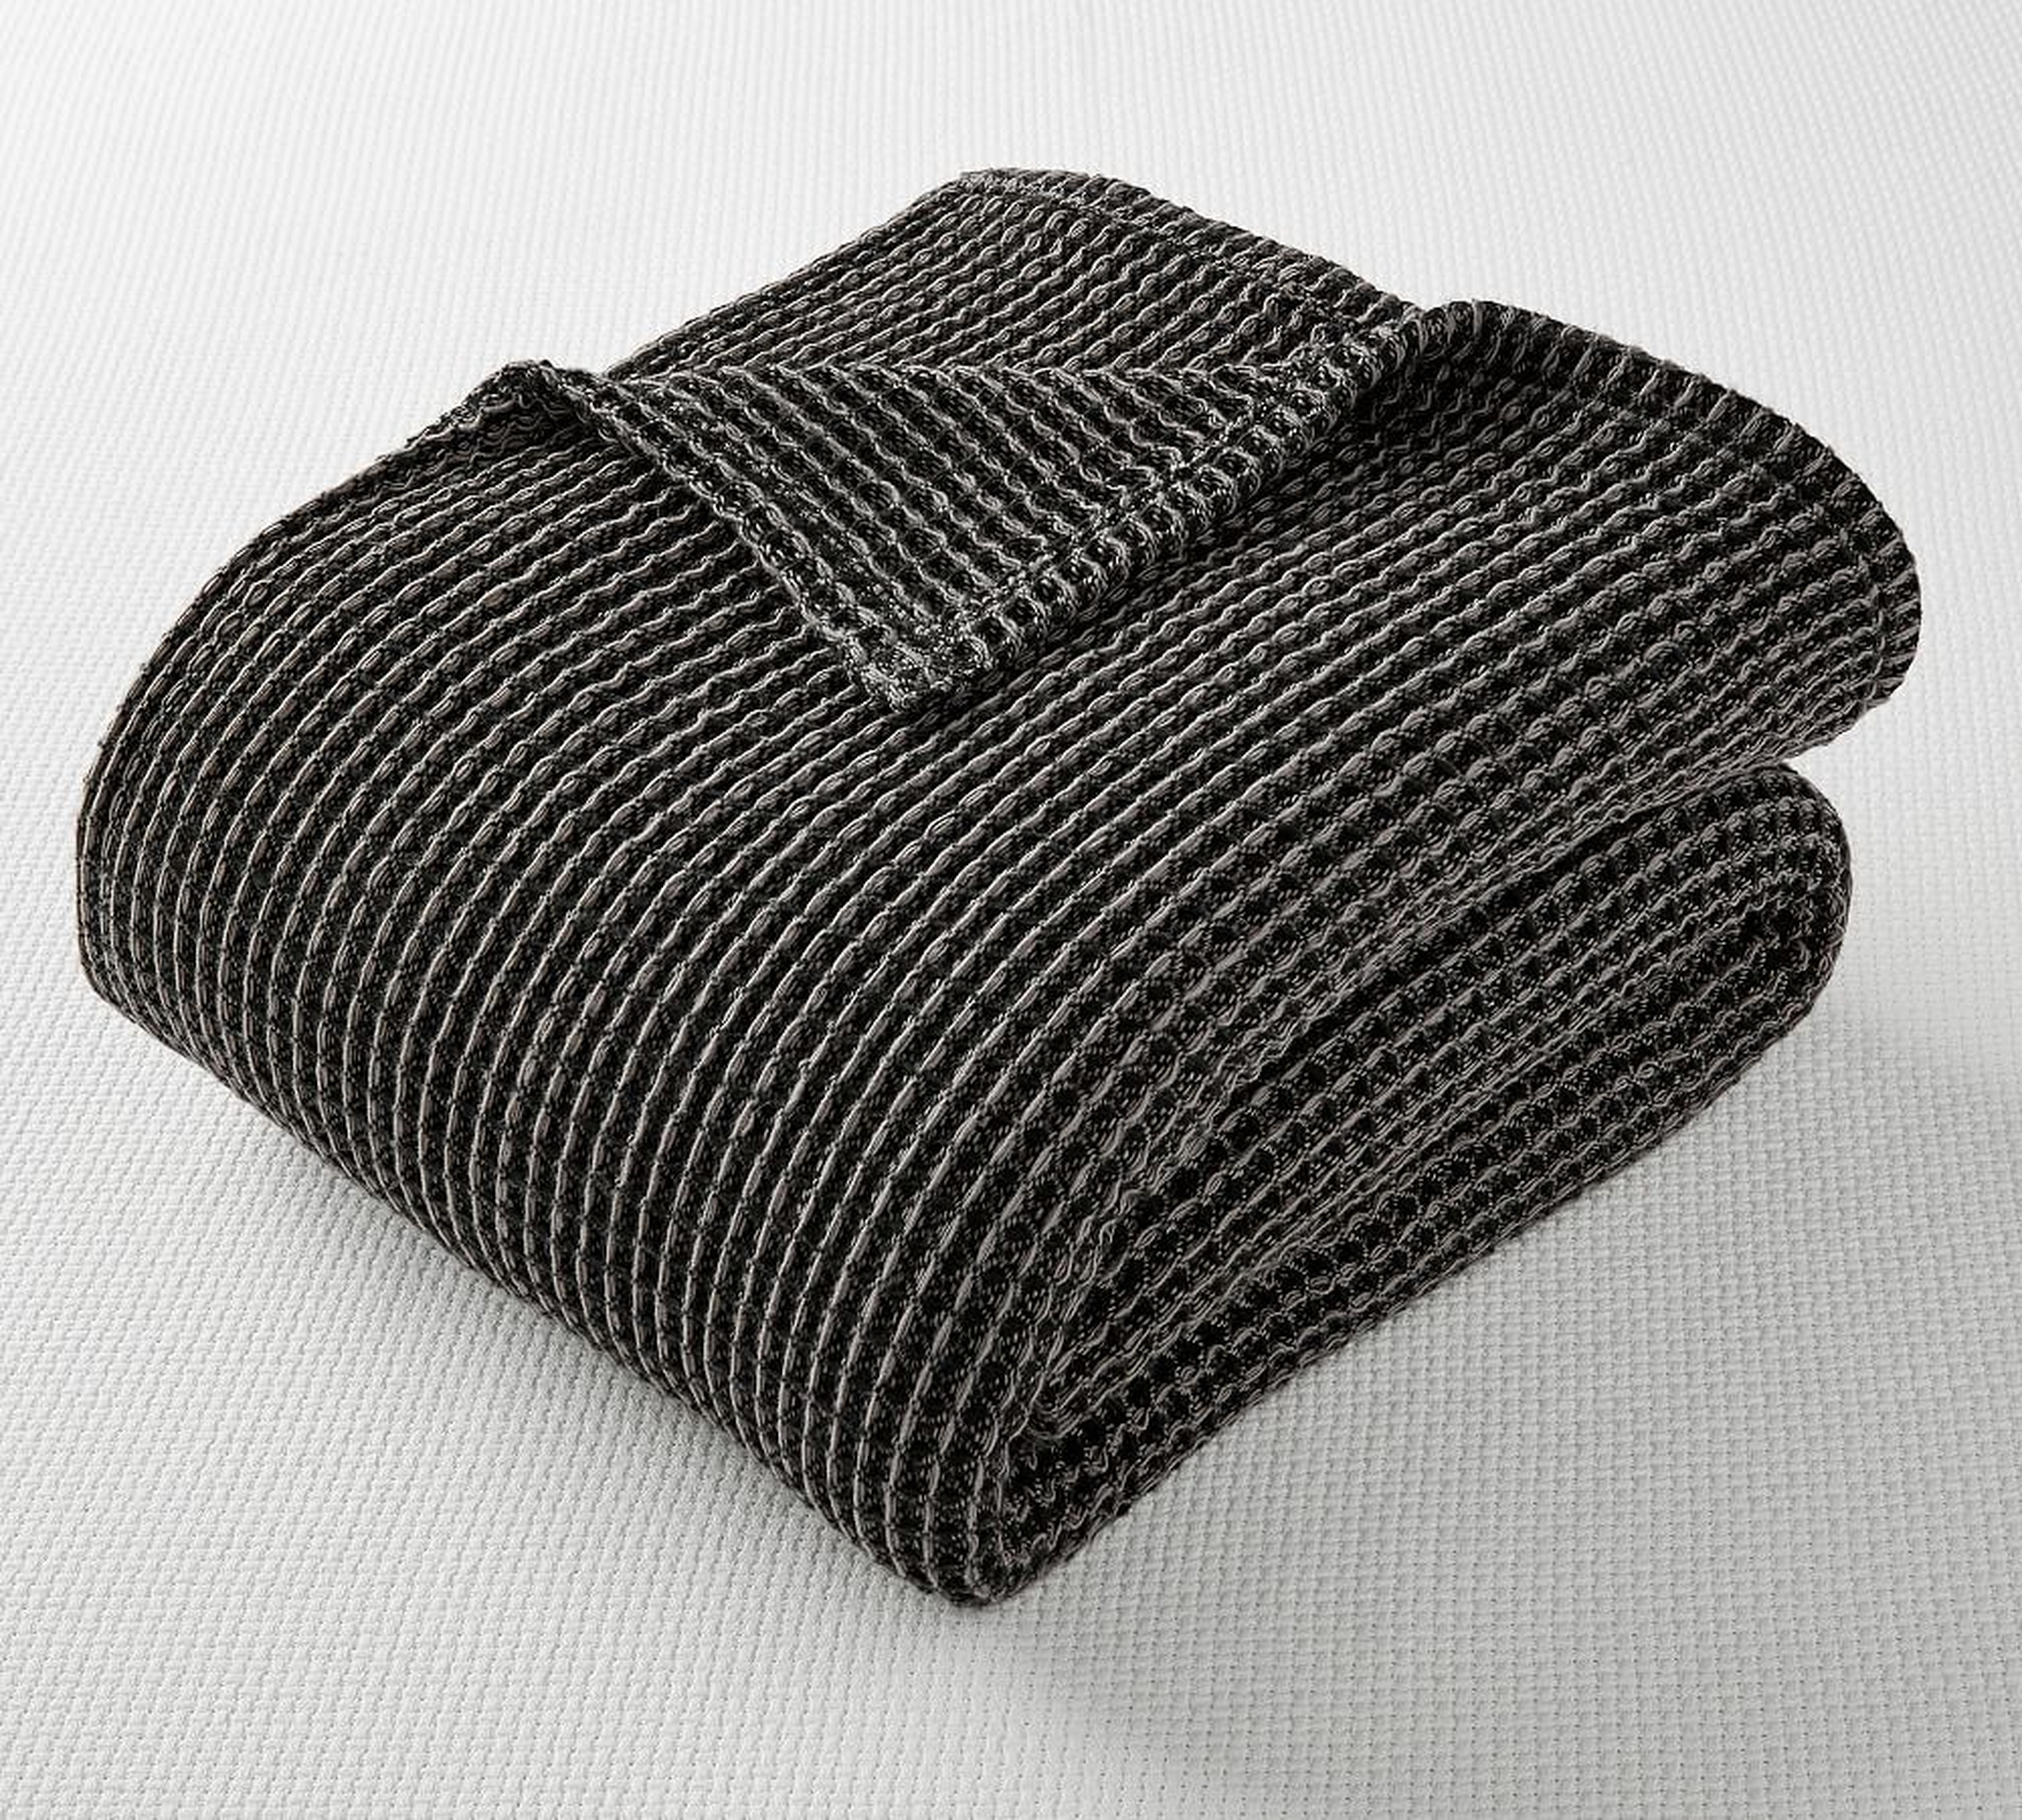 Waffle Weave Blanket, Full/Queen, Charcoal - Pottery Barn